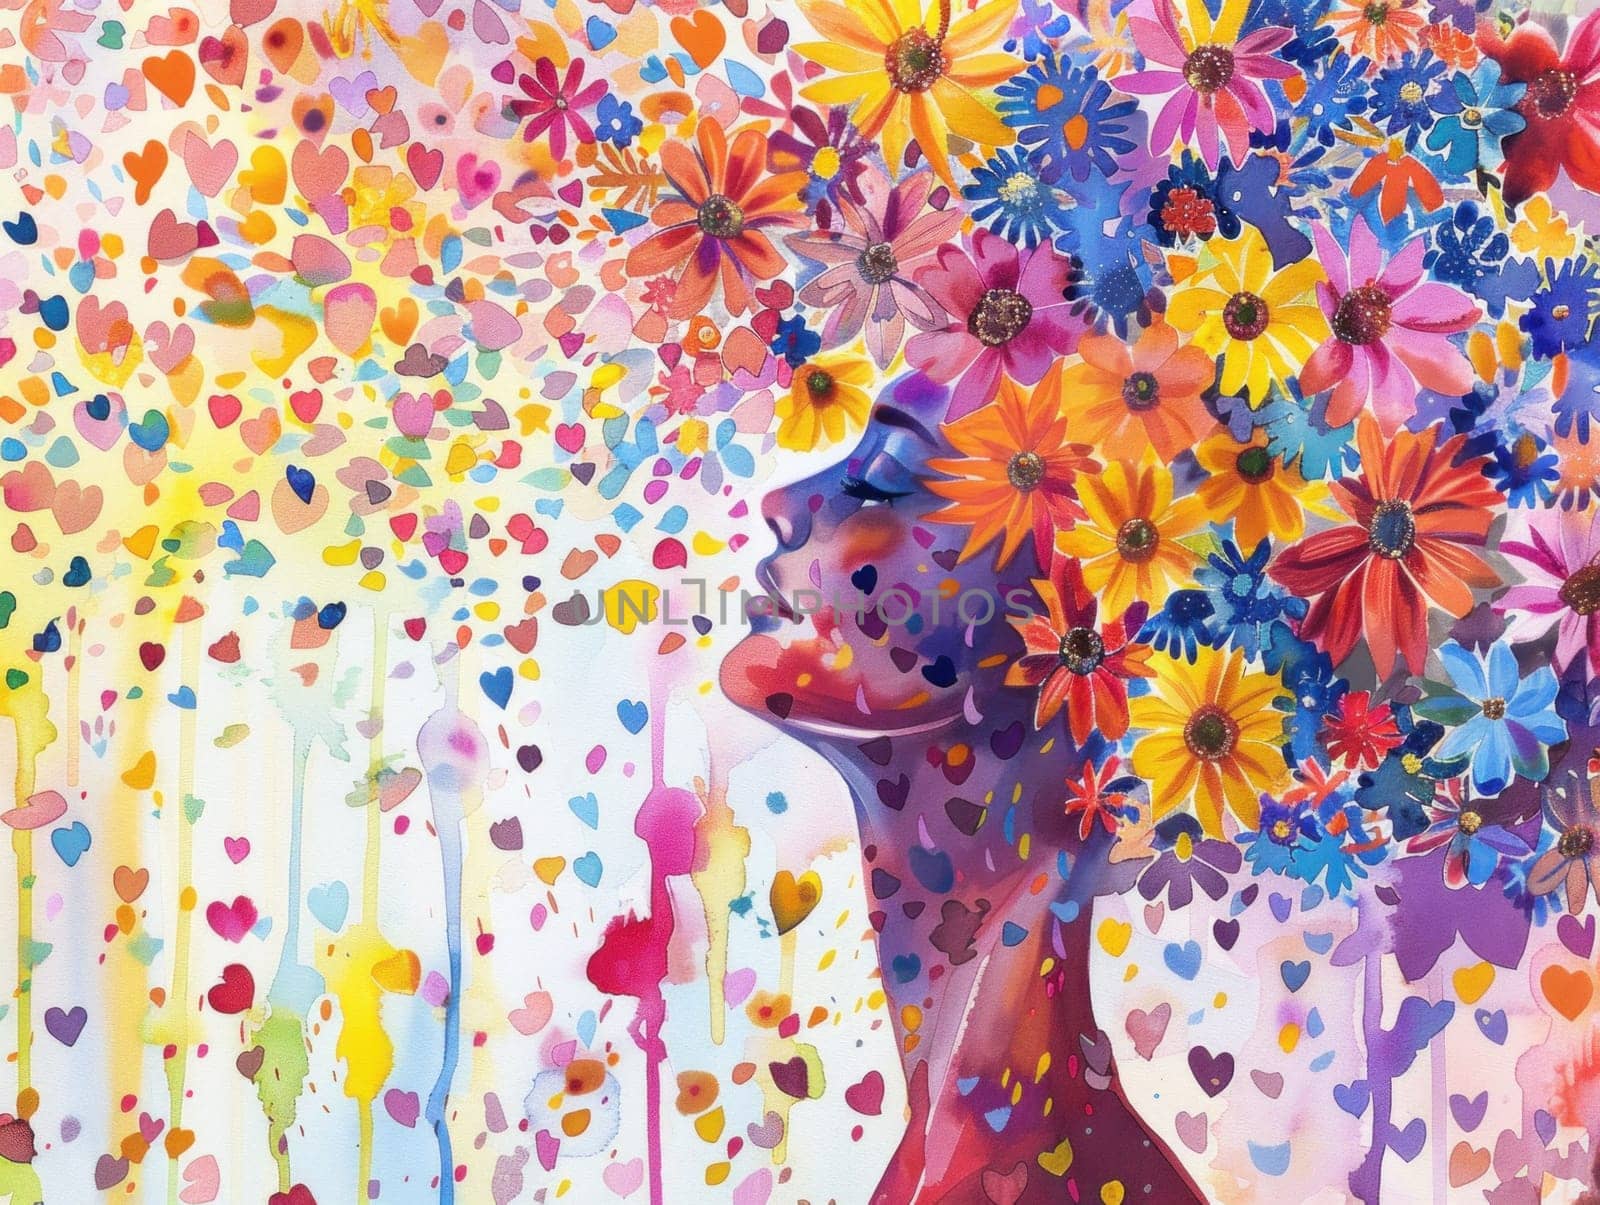 Woman with flowers in hair a vibrant portrait celebrating beauty and artistic expression through colorful splatters